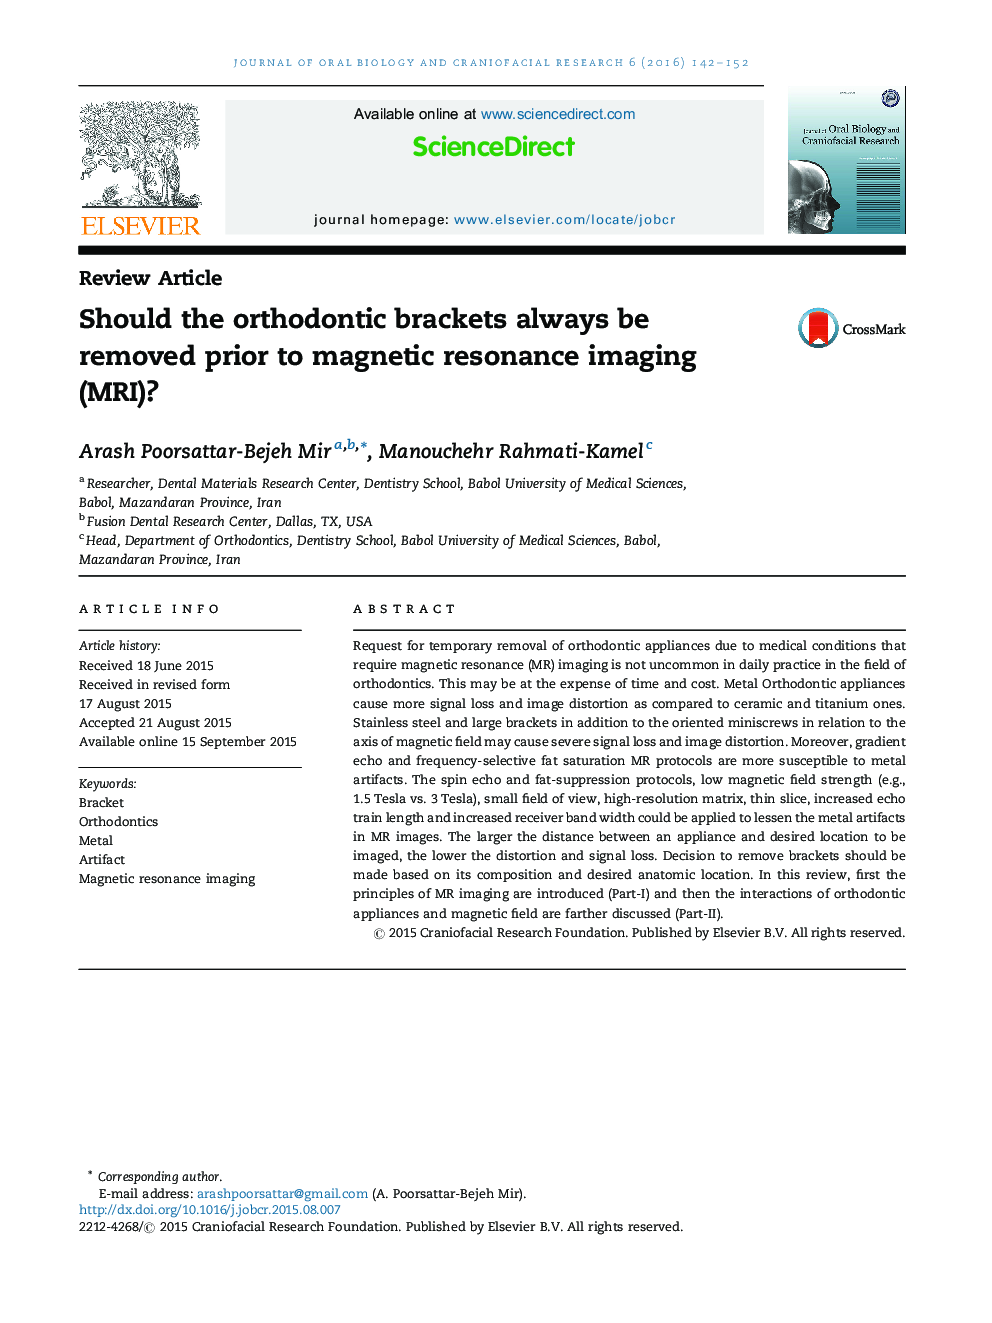 Should the orthodontic brackets always be removed prior to magnetic resonance imaging (MRI)?